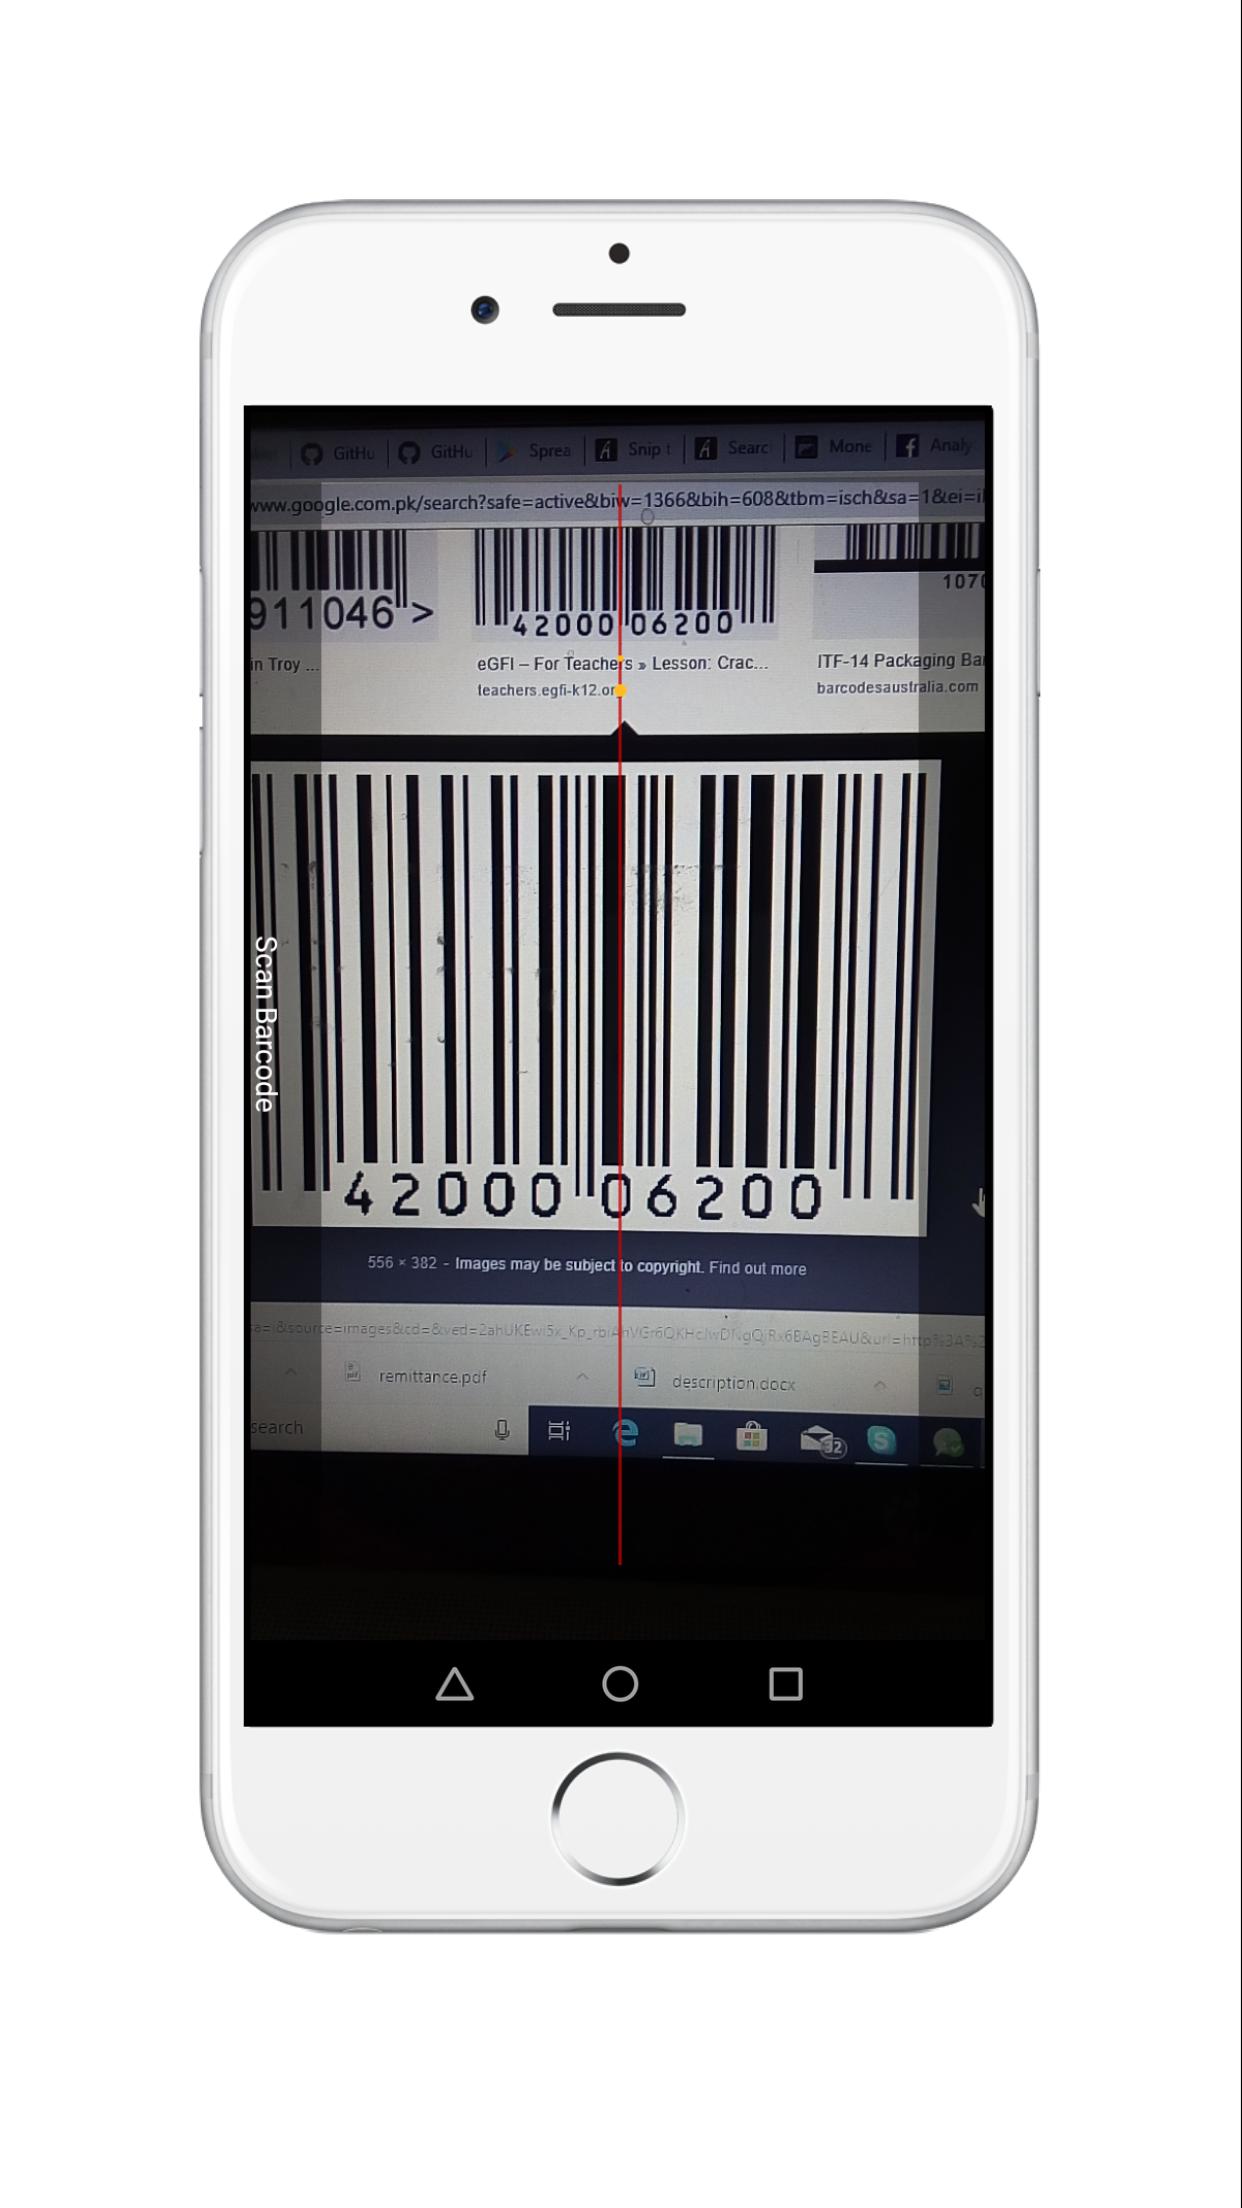 Barcode Scanner Qr Code Scanner For Android Apk Download - search q codes how to get free robux tbm isch